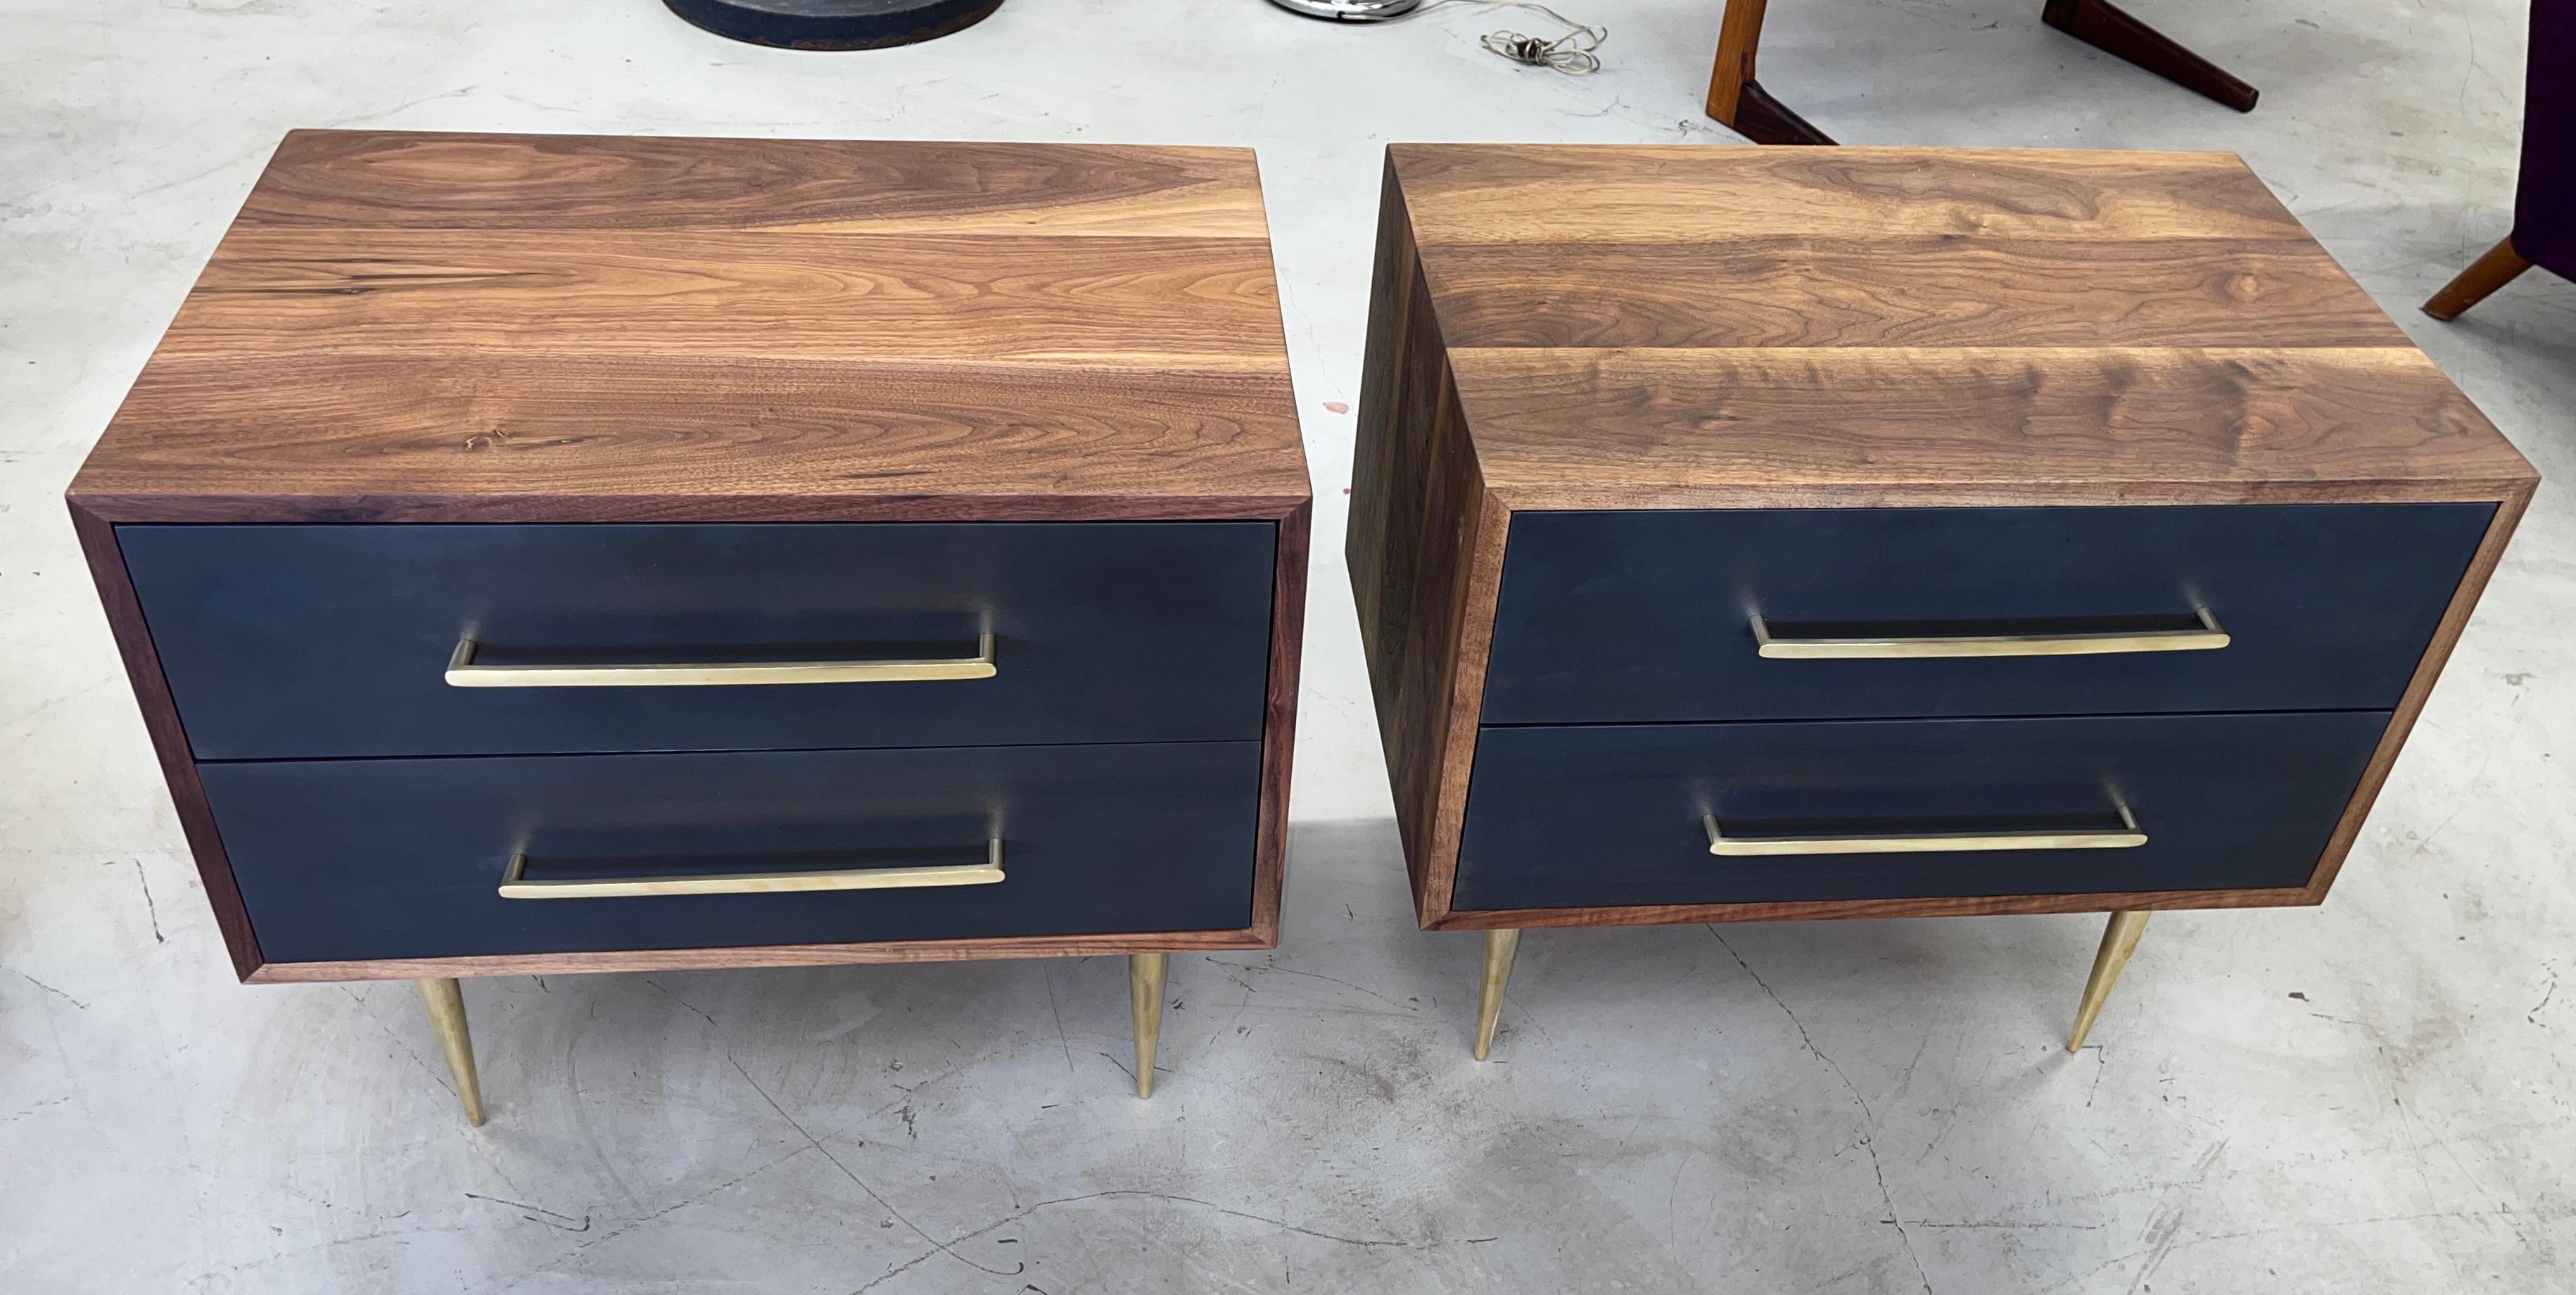 Beautiful pair of custom made solid walnut bodied nightstands with iron coated drawer fronts. 2 drawers each. Solid brass Italian drawer pulls and solid brass tapered legs. Beautiful graining to the wood with finished backs. The drawers are